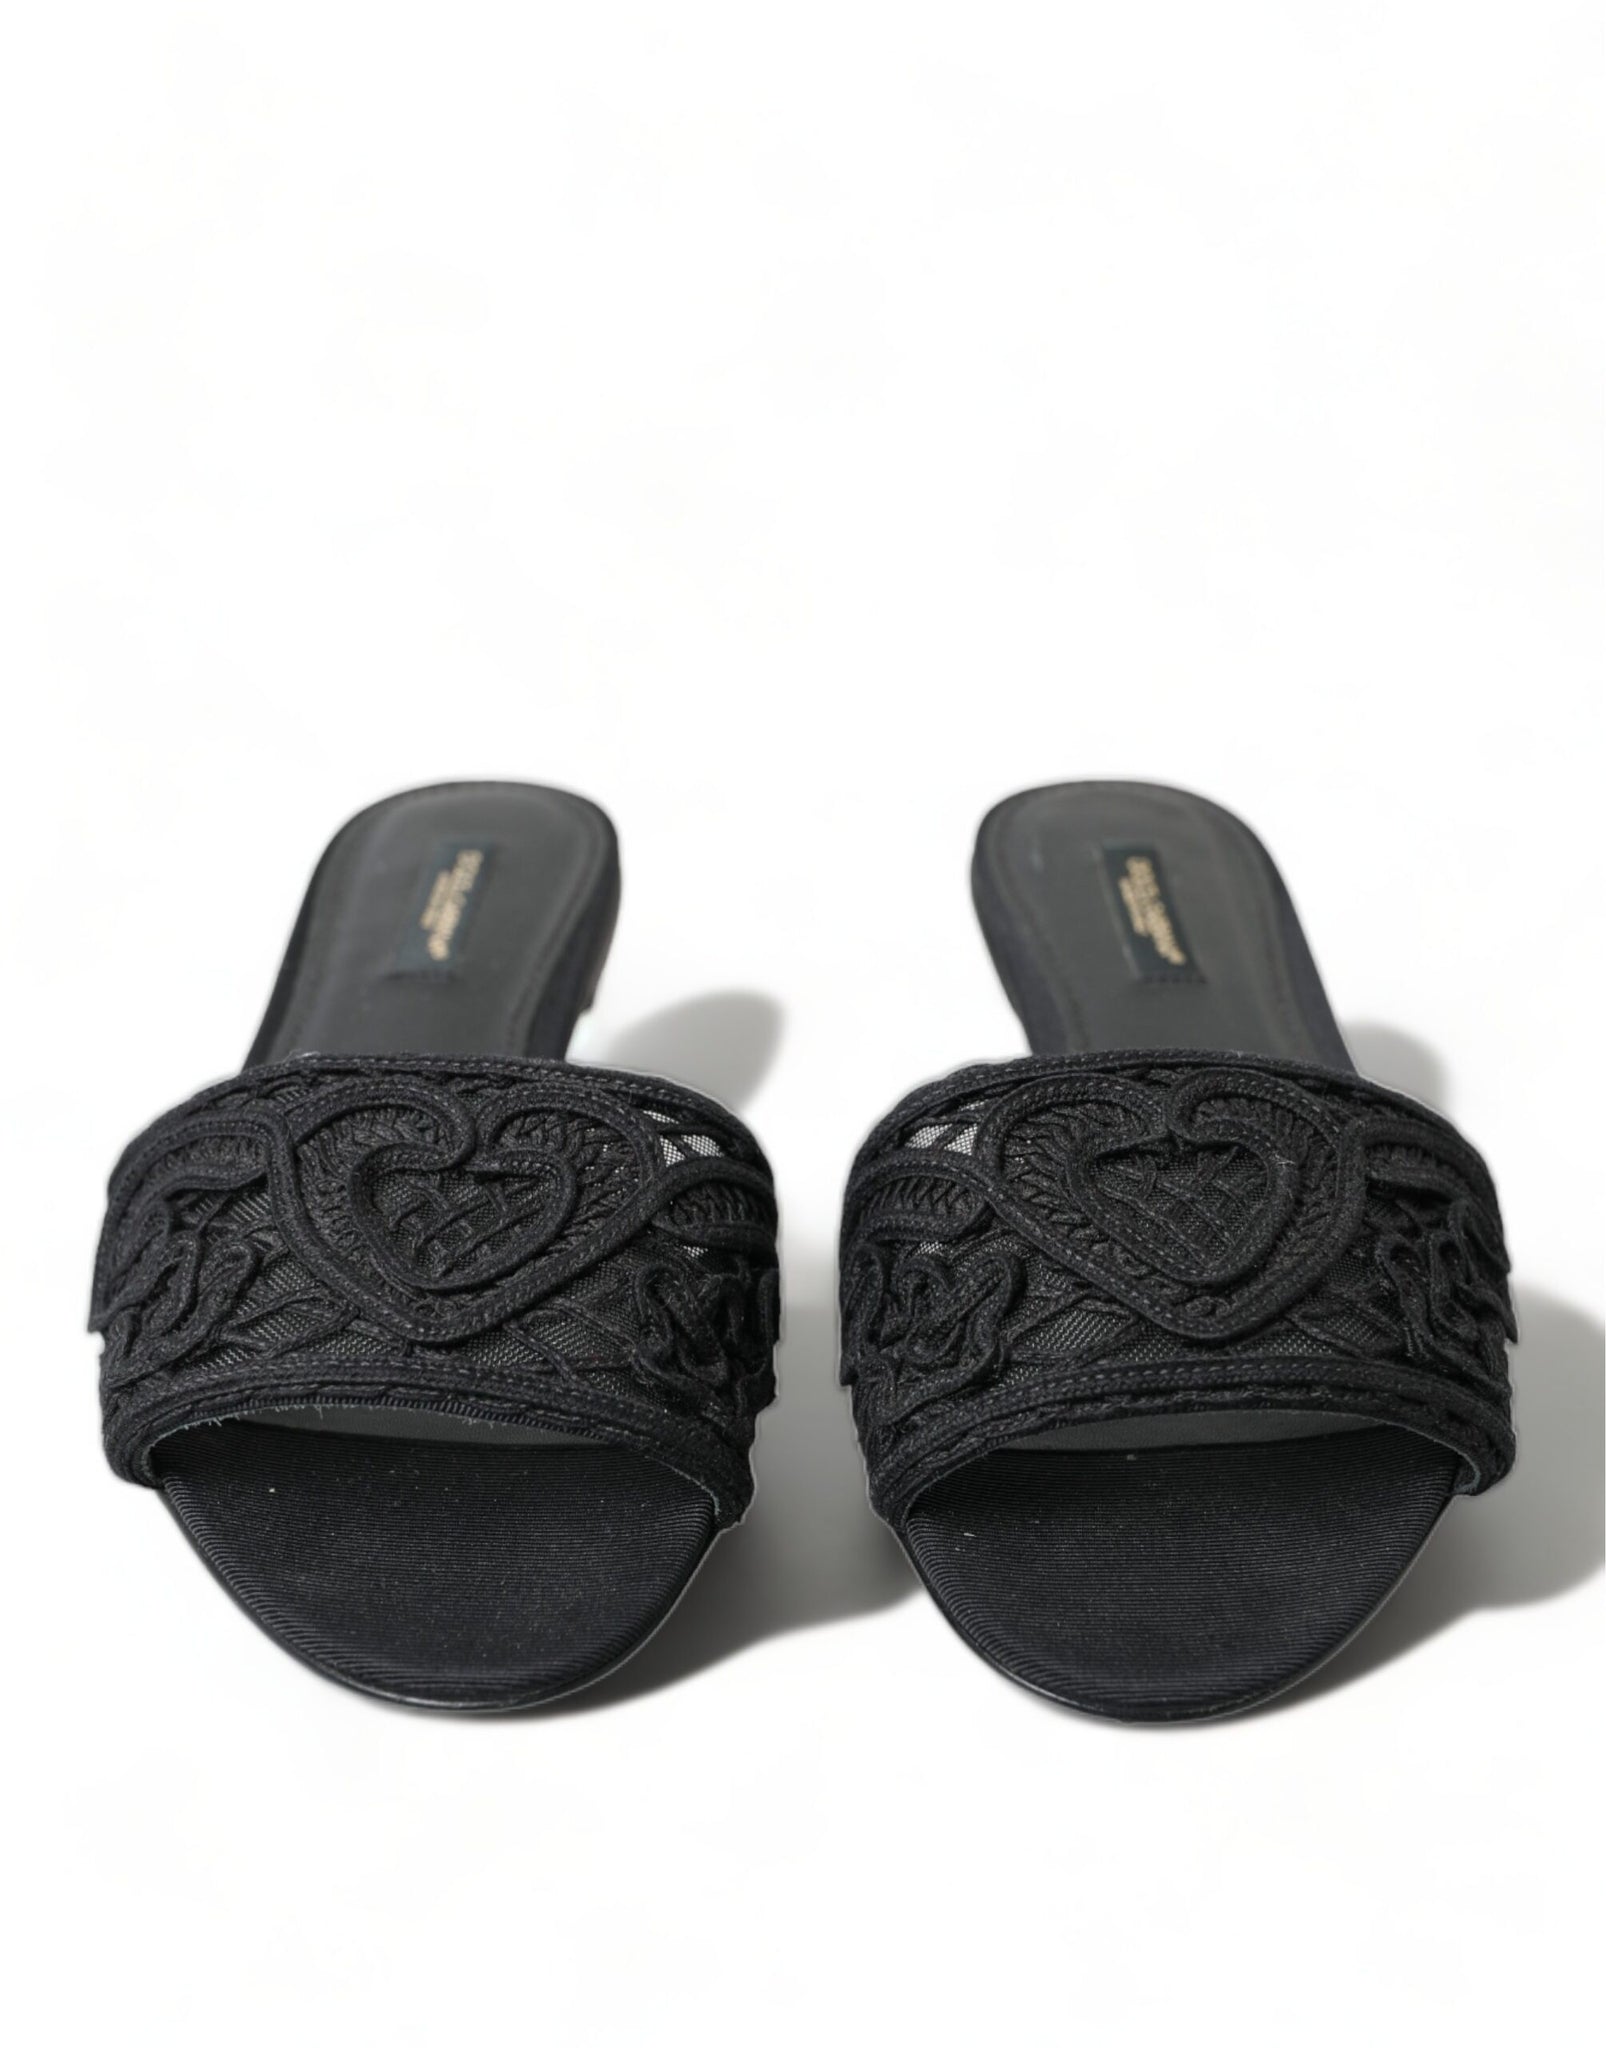 Dolce & Gabbana Black Cotton Heart Embroidery Sandals Shoes